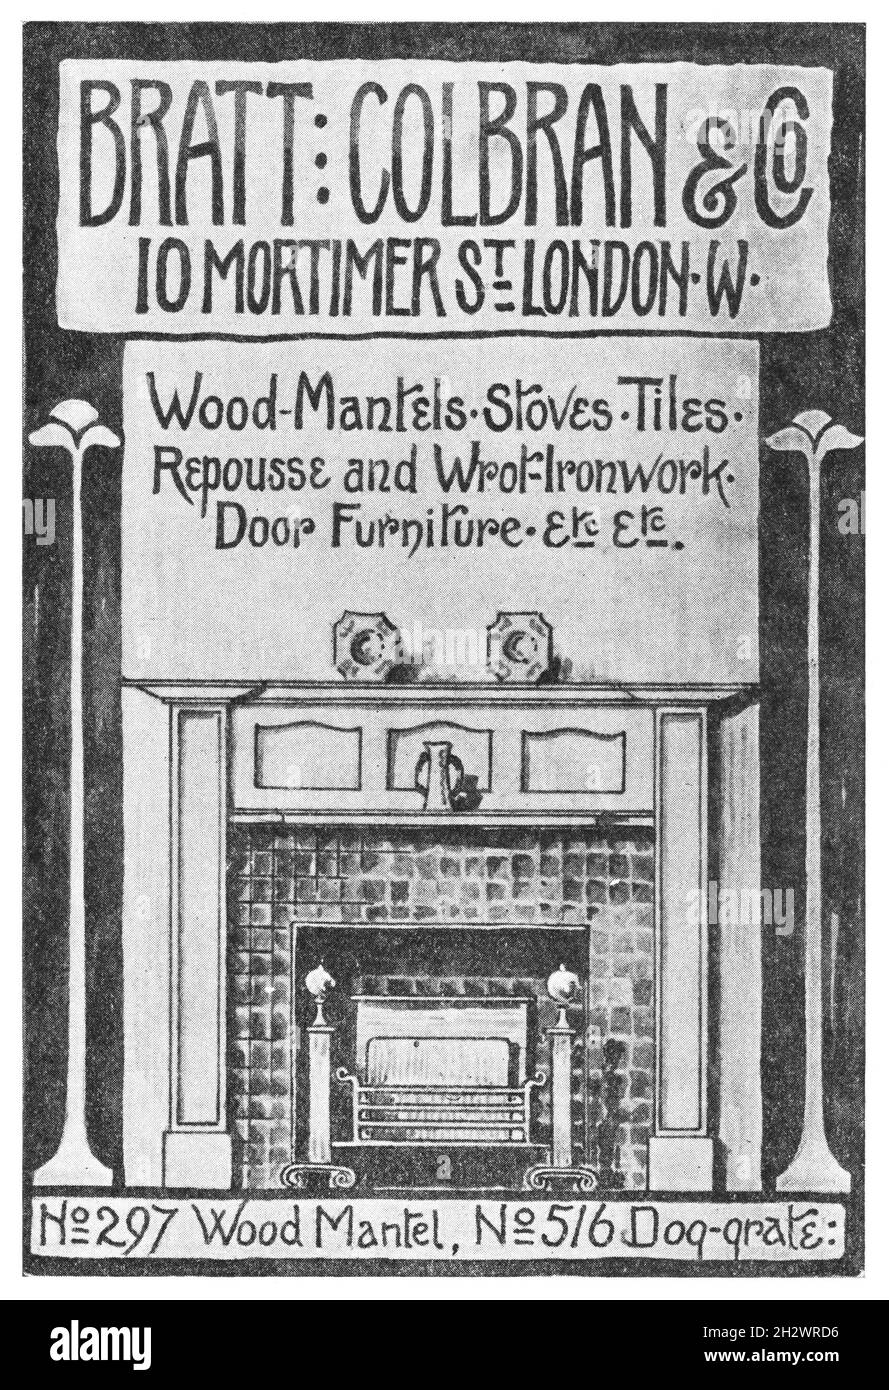 A 1902 ‘Arts & Crafts’ style advertisement promoting “Bratt, Colbran & Co.” of 10 Mortimer St., London, W. “Wood-Mantels, Stoves, Tiles, Repousse and Wrot-ironwork, Door Furniture, etc.”. Stock Photo